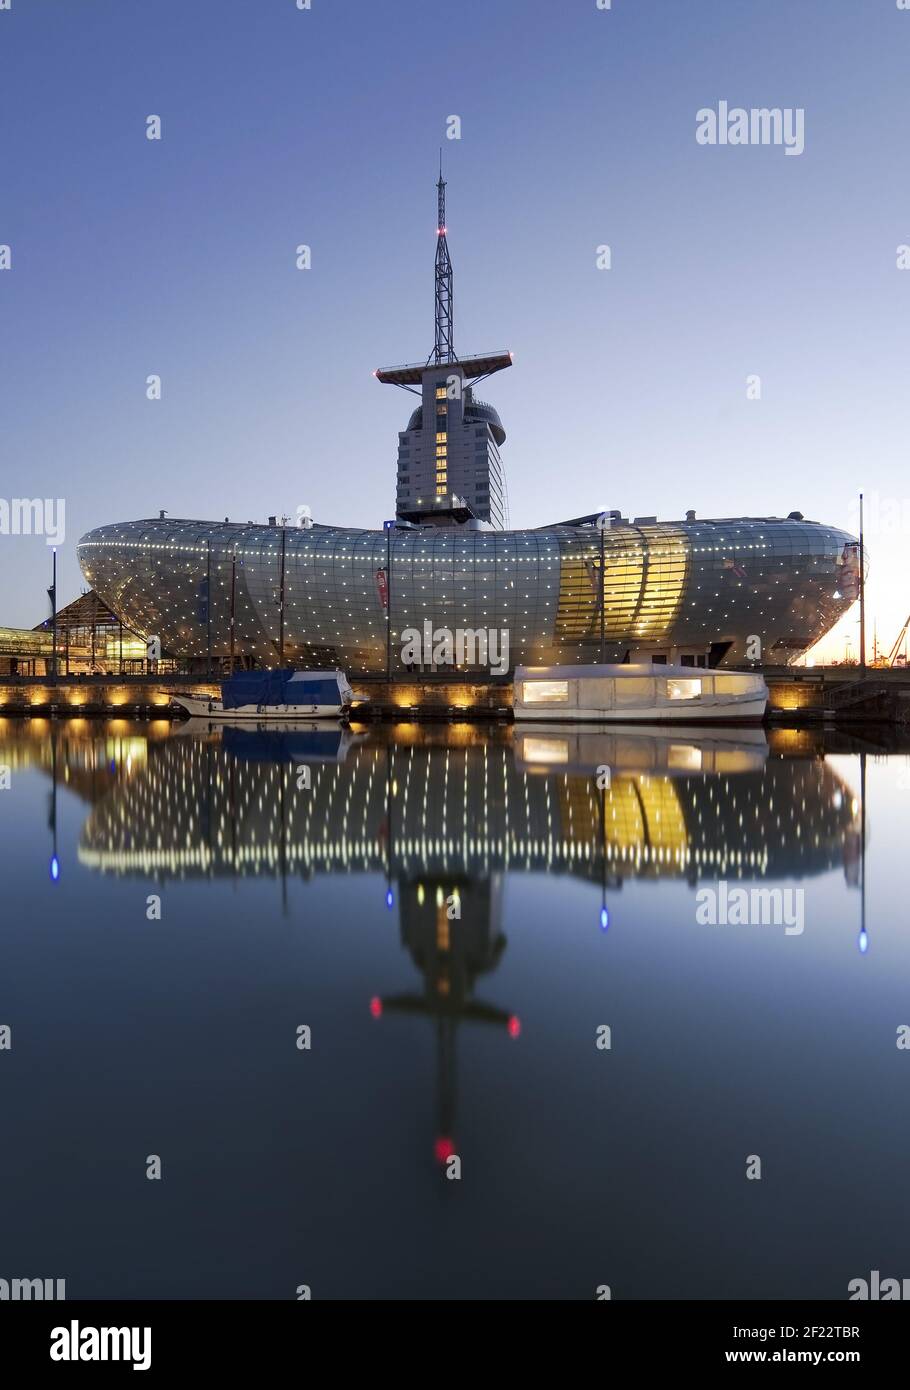 Illuminated climate house Bremerhaven in the evening, Havenwelten, Bremerhaven, Germany, Europe Stock Photo